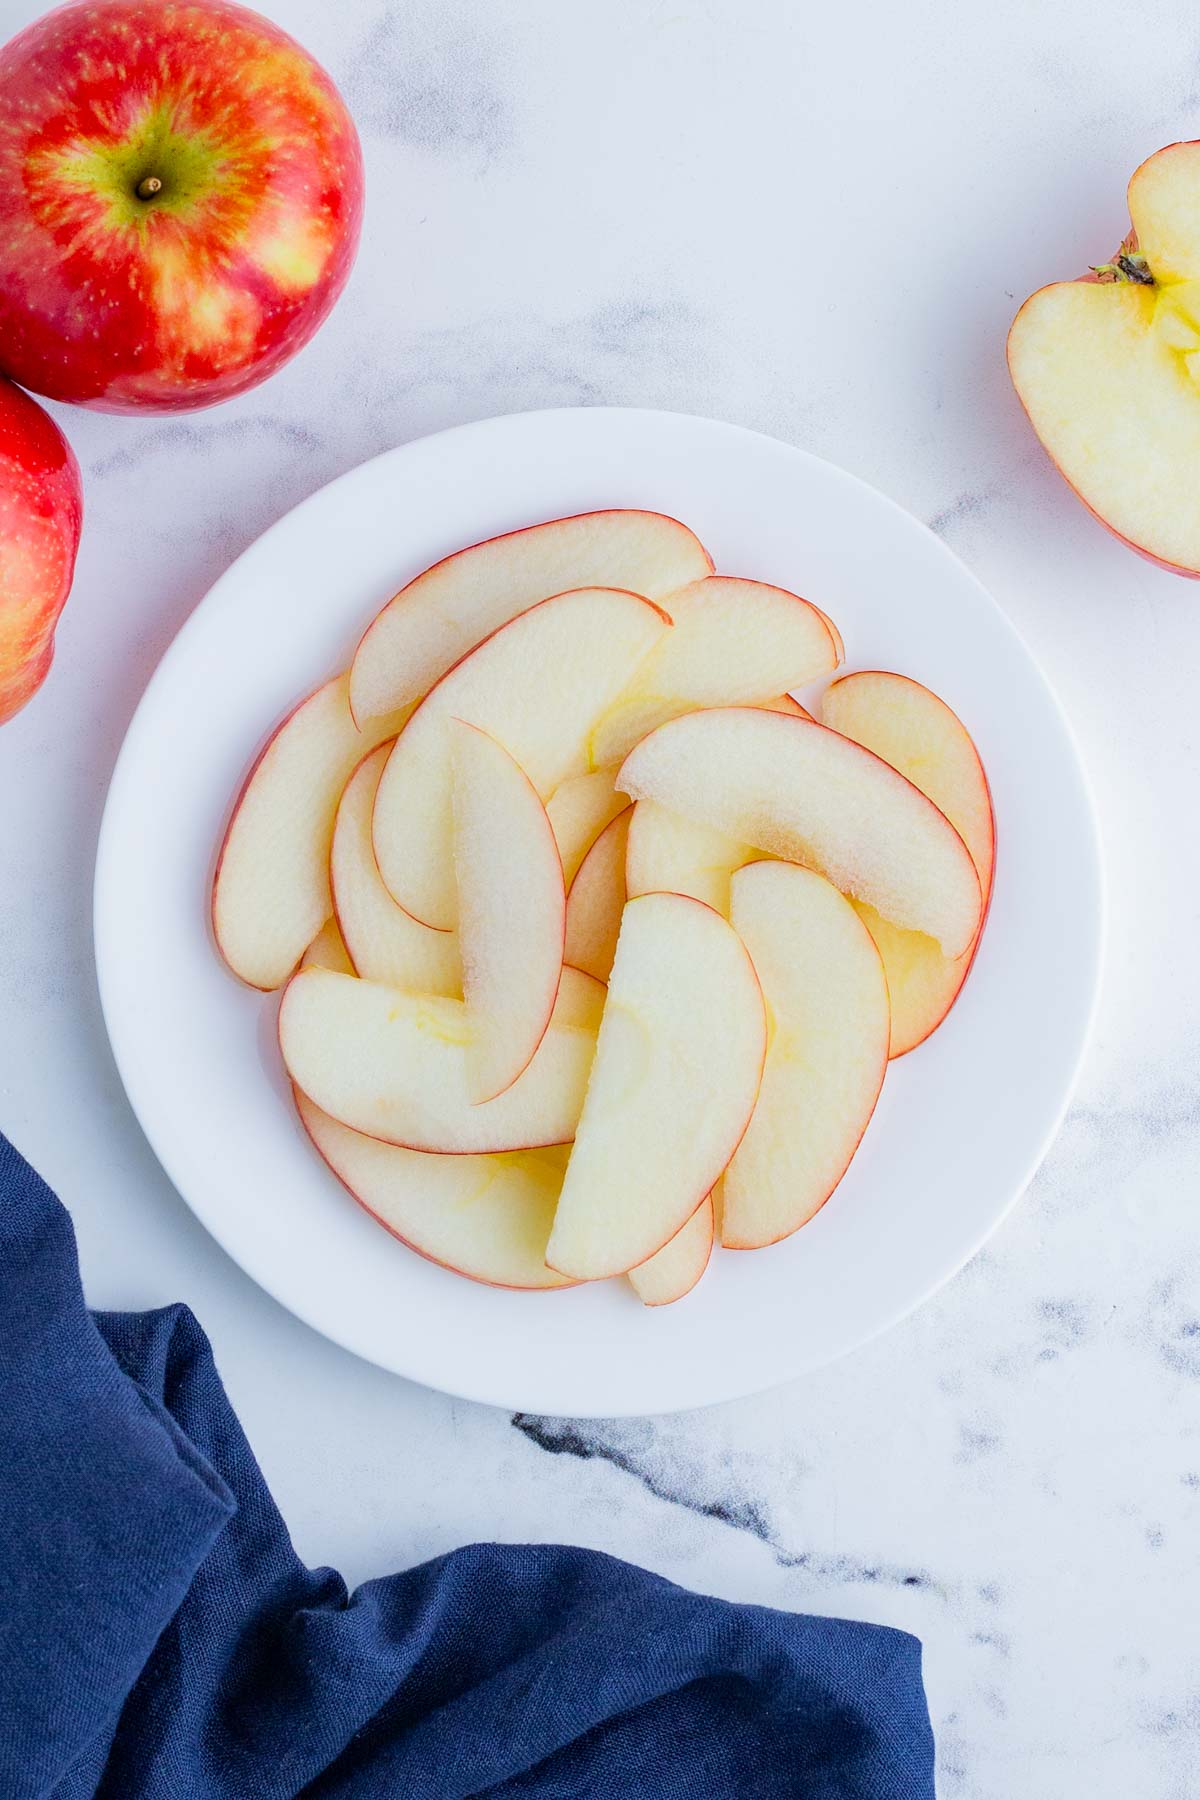 The #1 Way To Keep Apples From Turning Brown